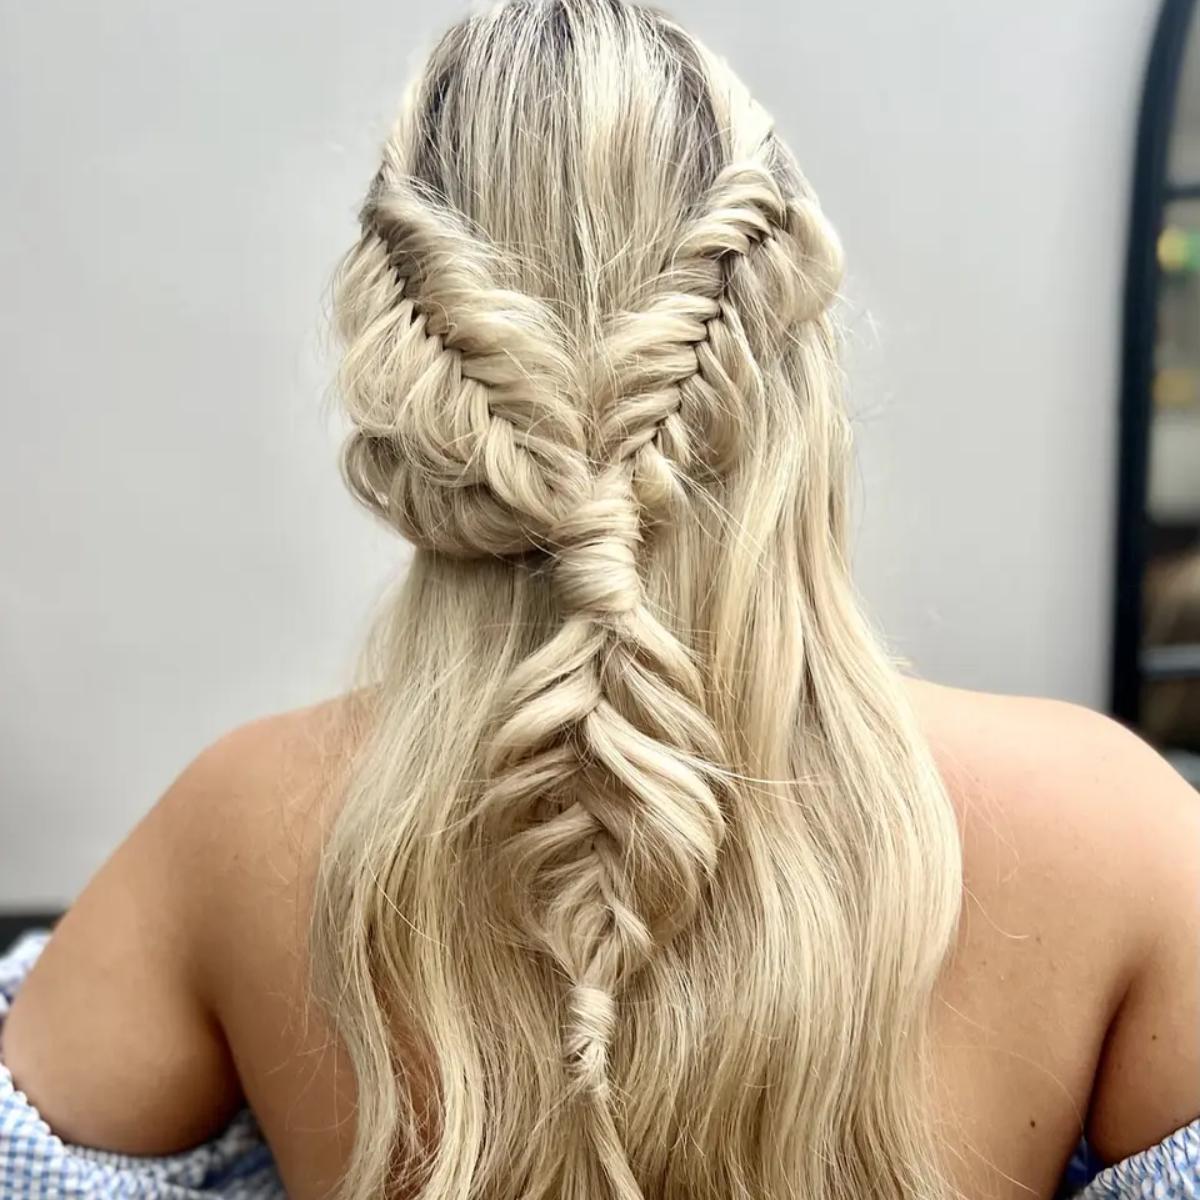 28 Stunning Hairstyle Ideas for Prom - Raising Teens Today